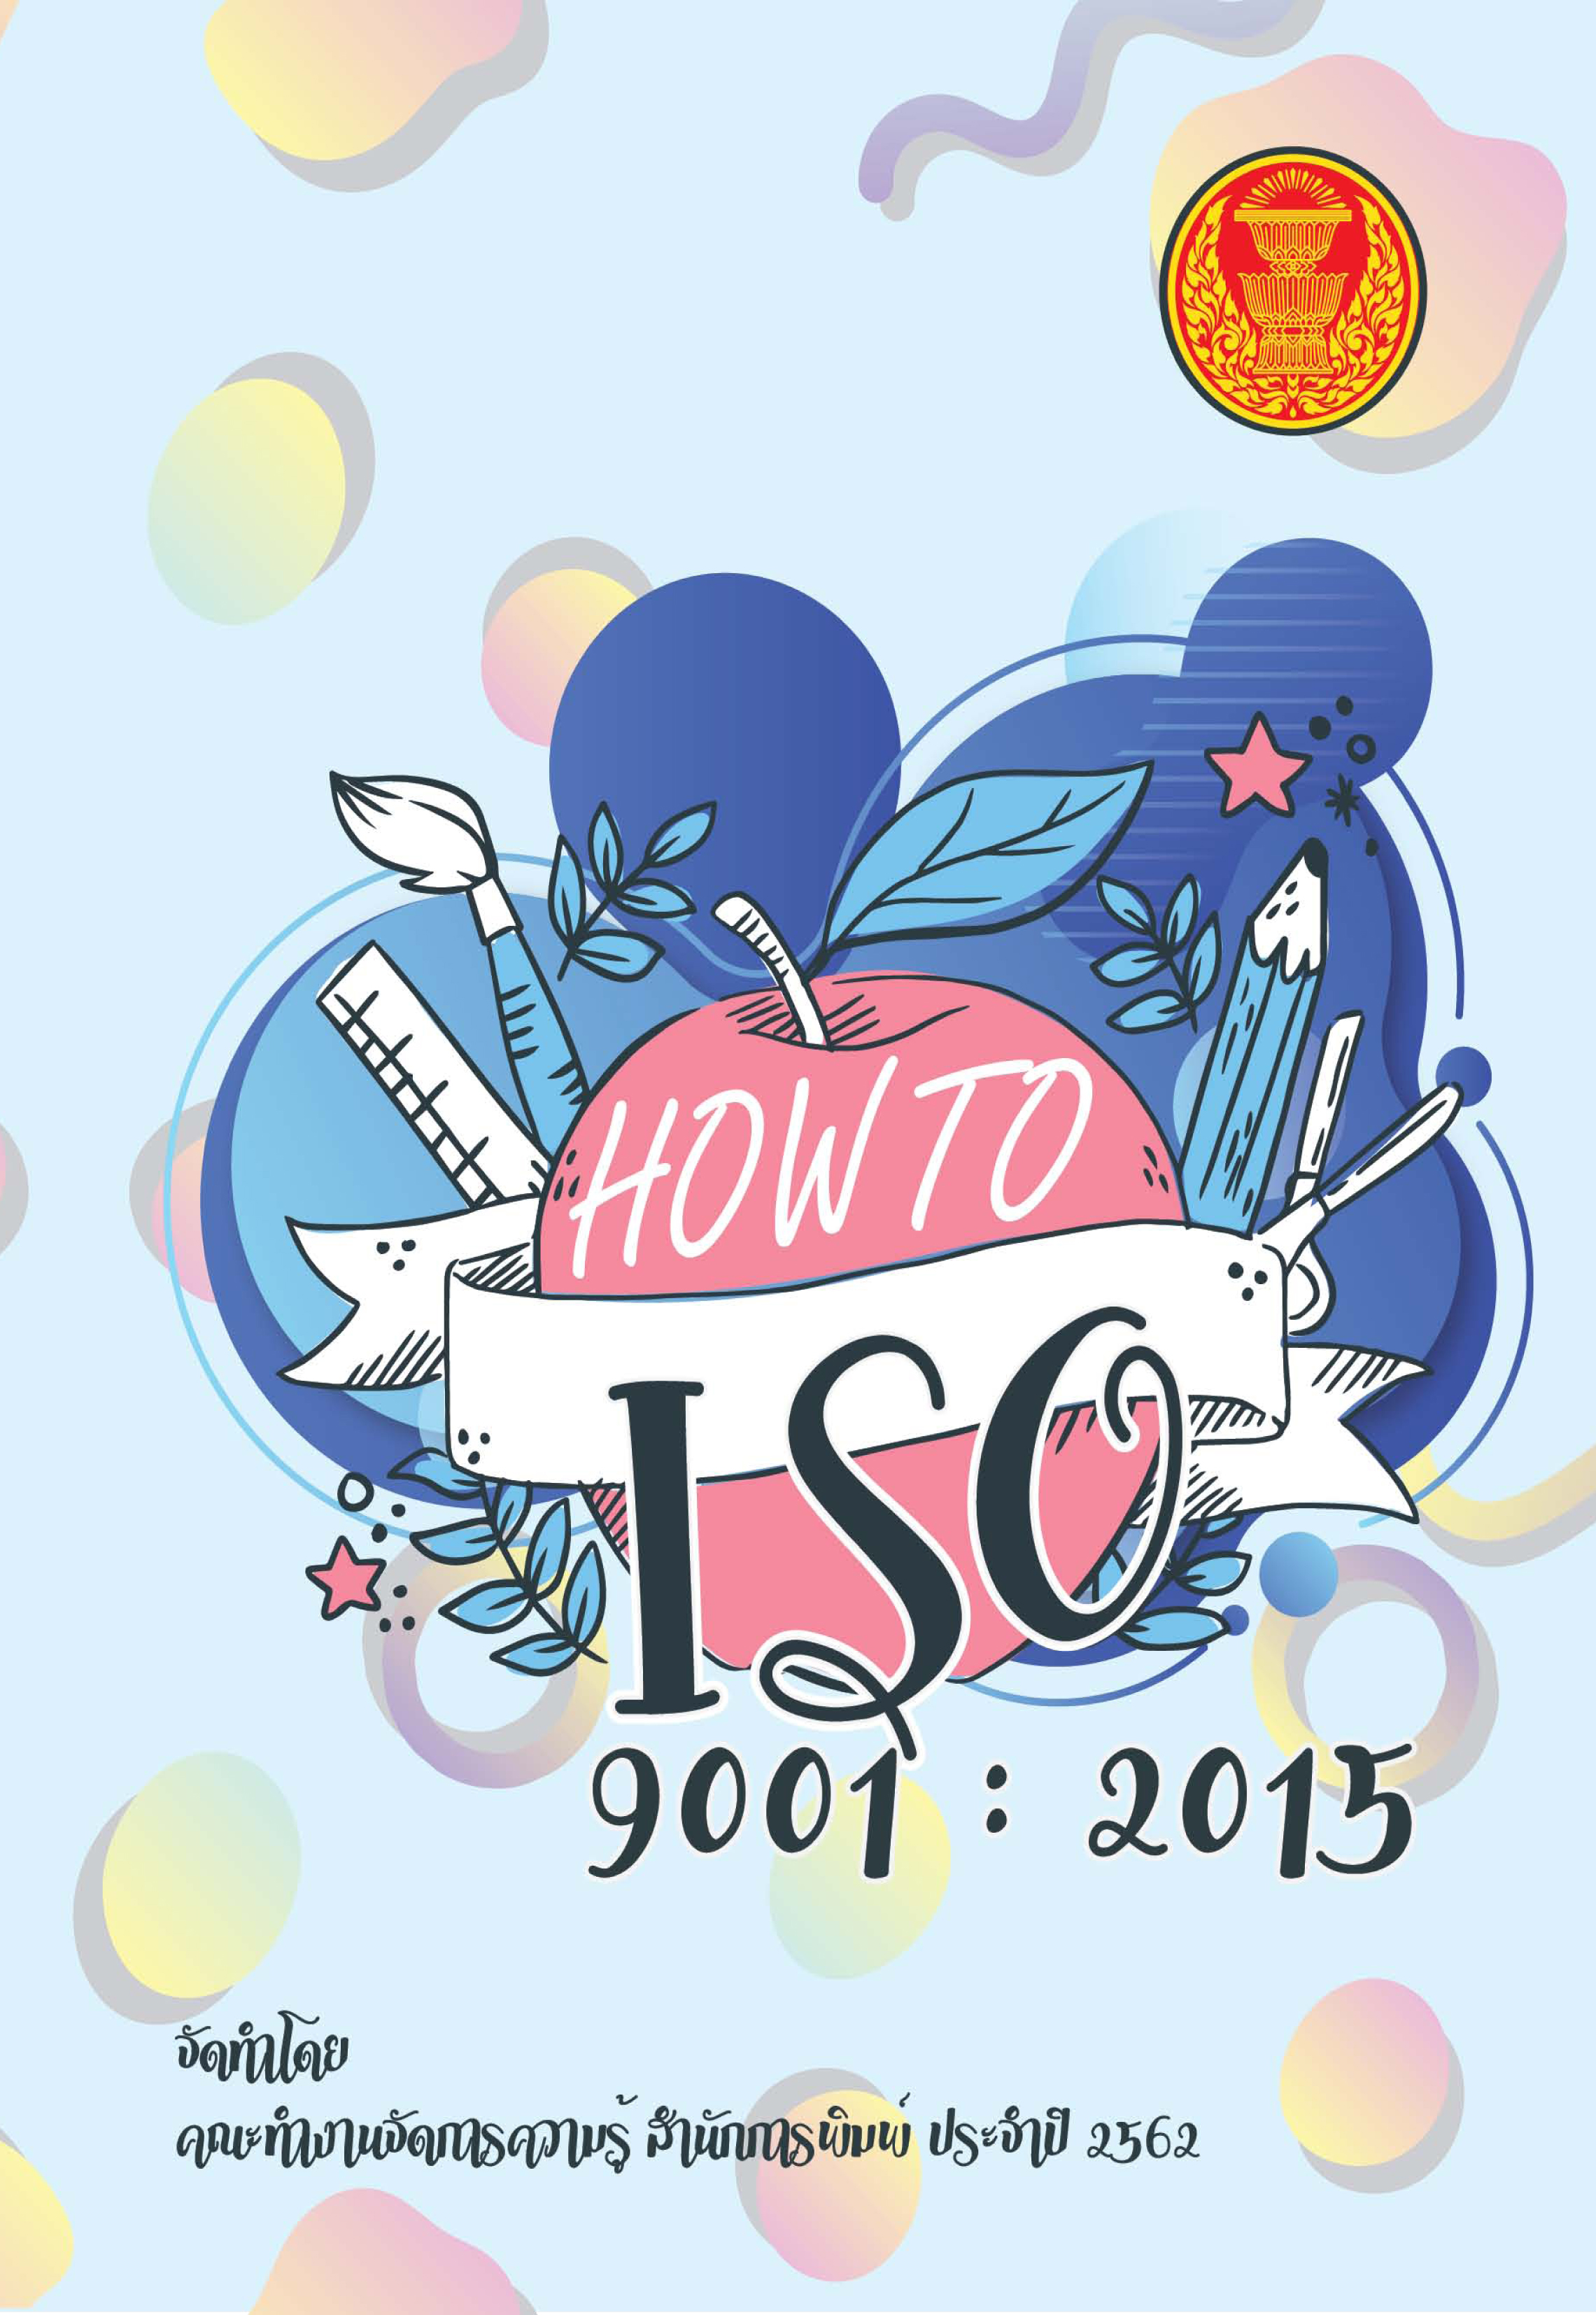 HOW TO ISO 9001